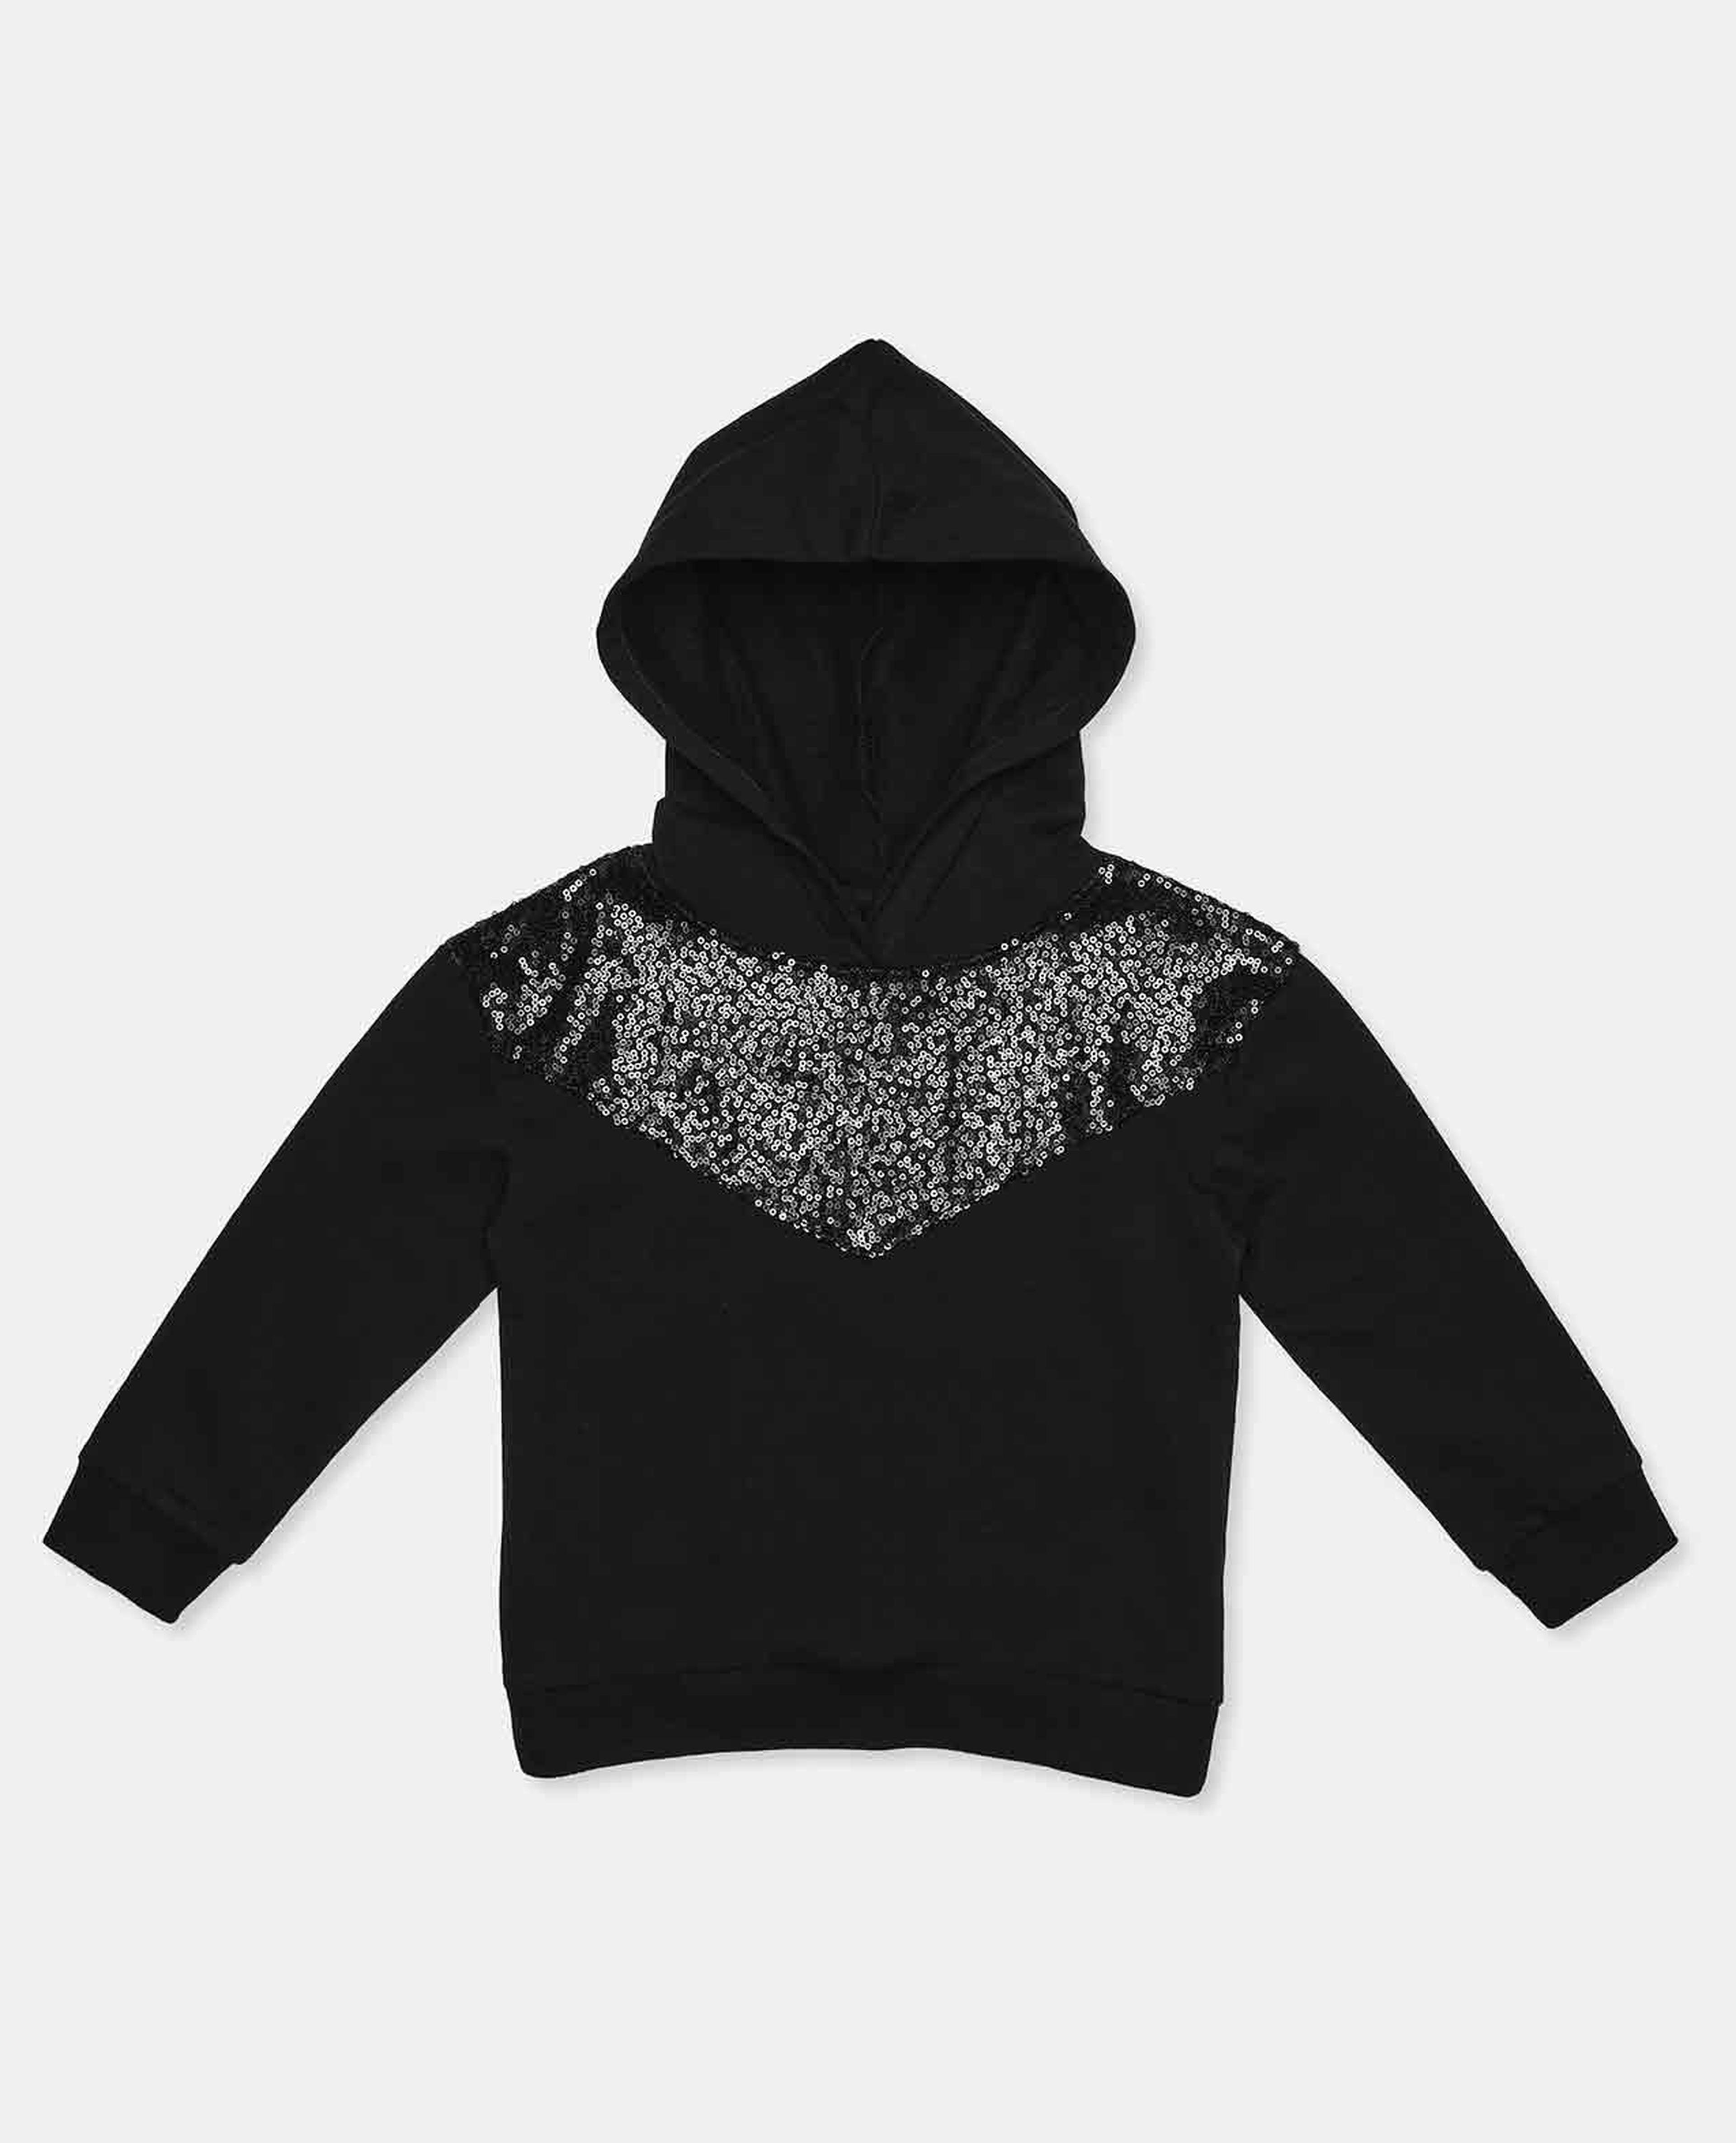 Sequinned Sweatshirt with Hooded Neck and Long Sleeves